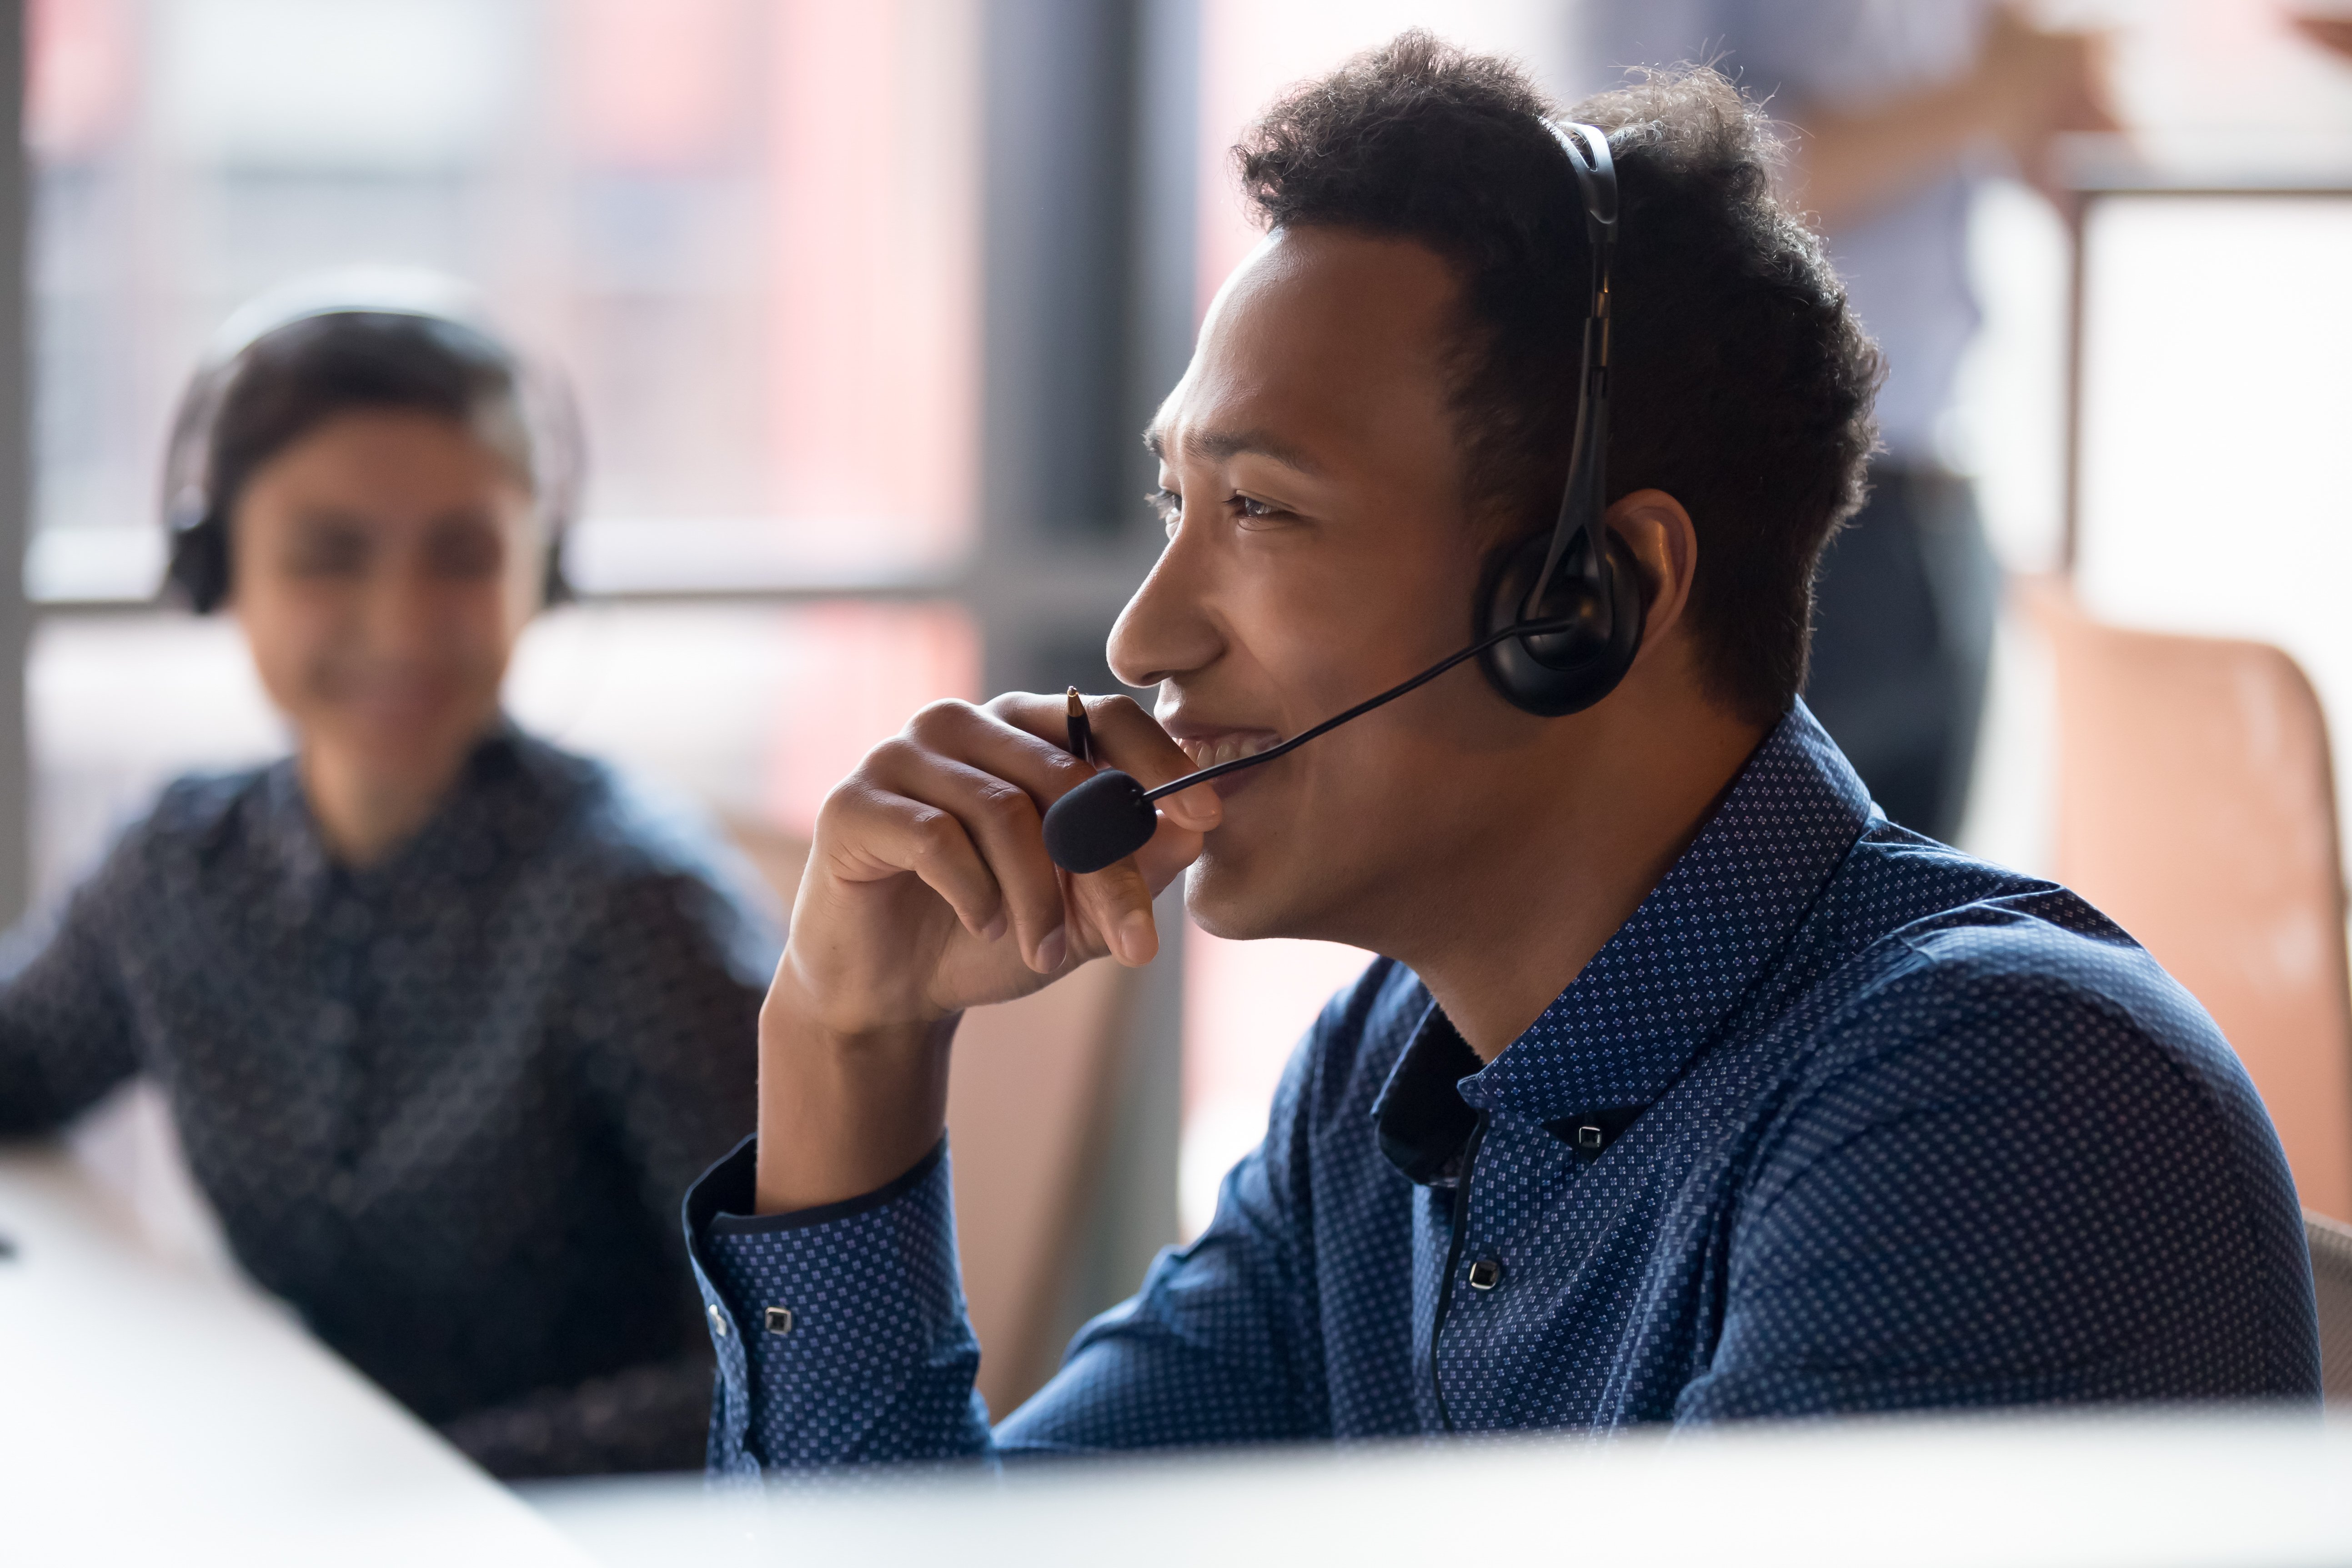 cms compliance audit year round call center